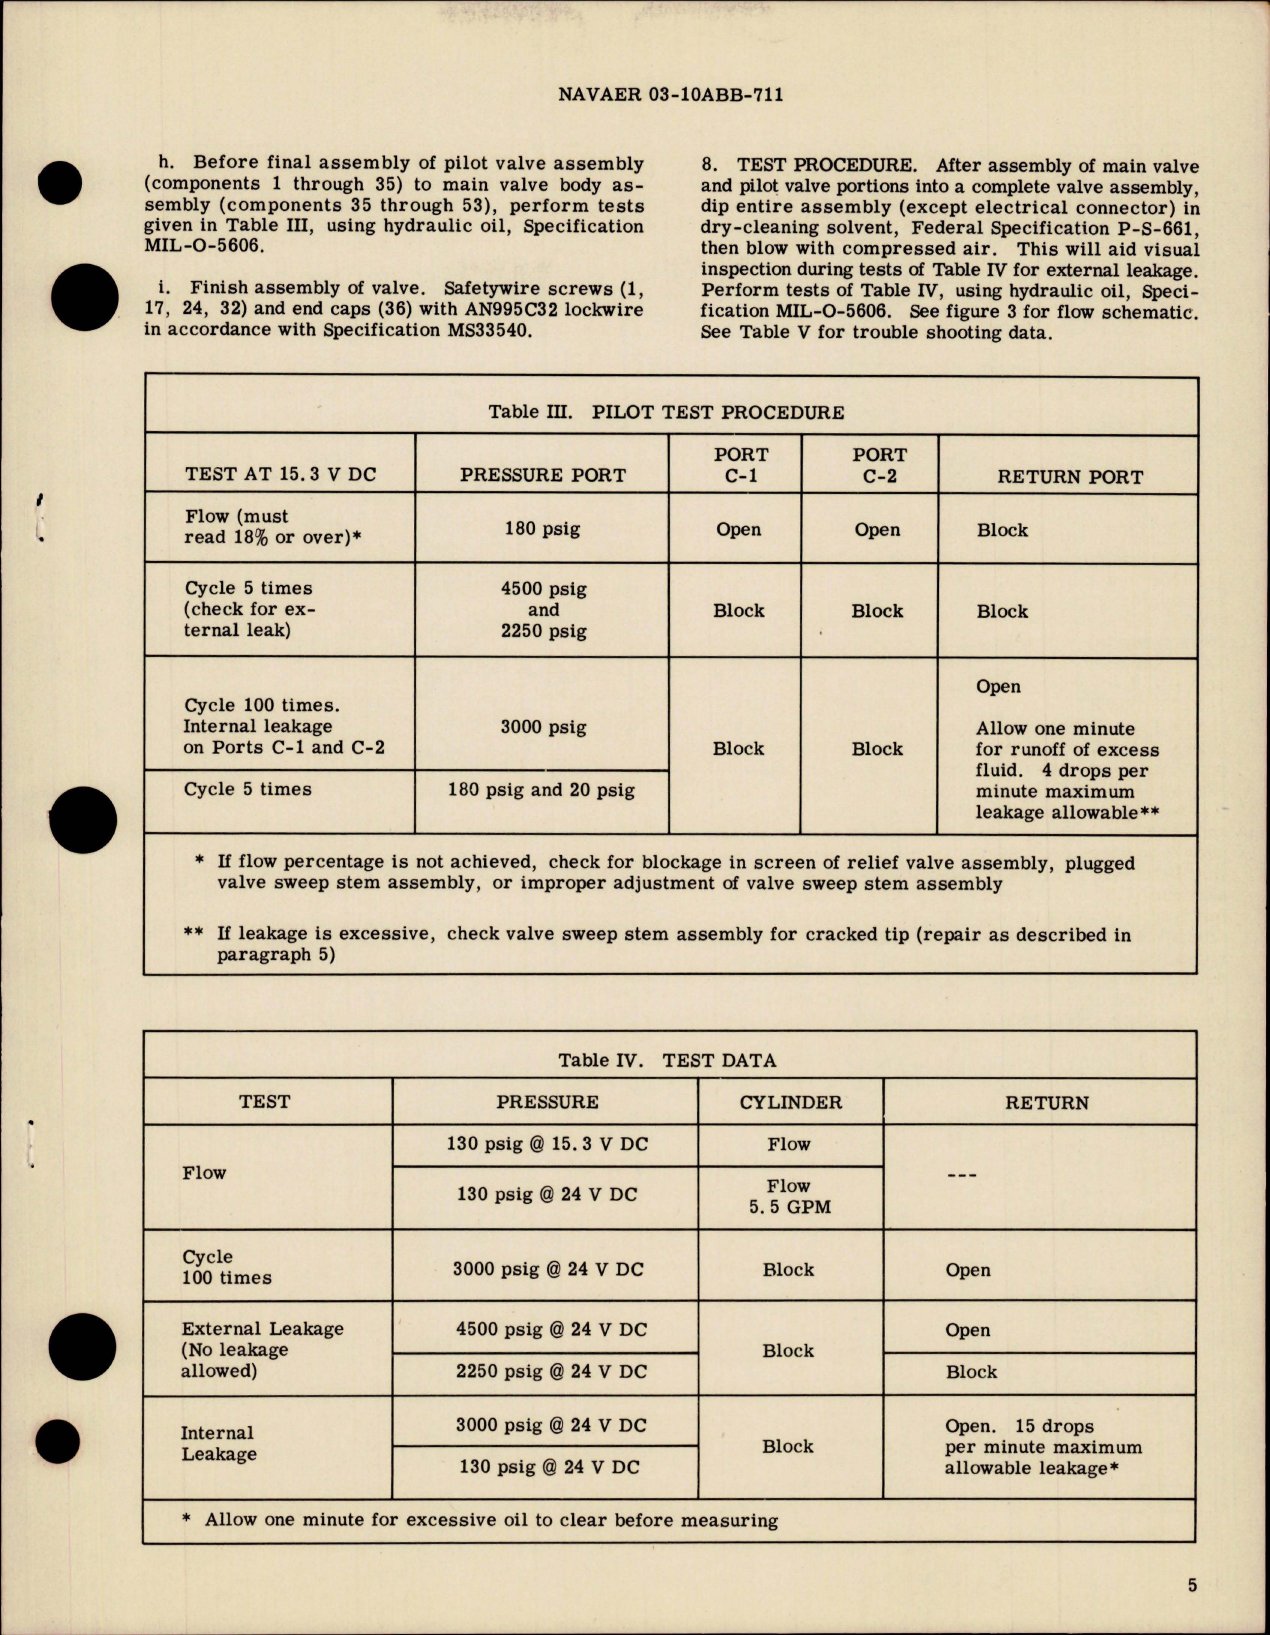 Sample page 5 from AirCorps Library document: Overhaul Instructions with Parts for Three Way Selector Valve - Parts AV-13A1120, AV-13A1127 and AV-13A1138